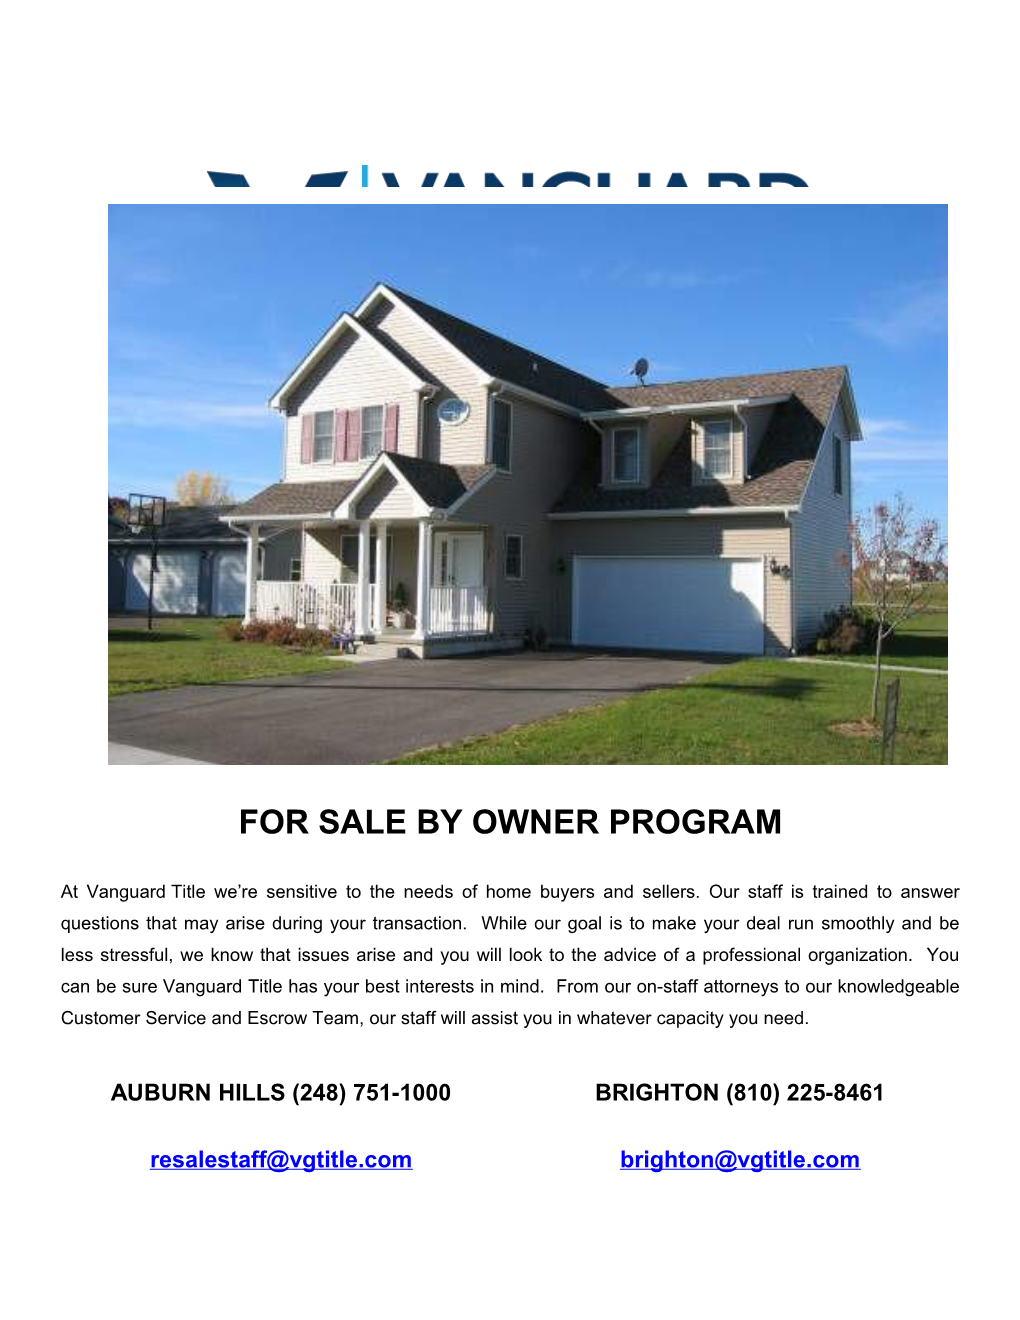 For Sale by Owner Program